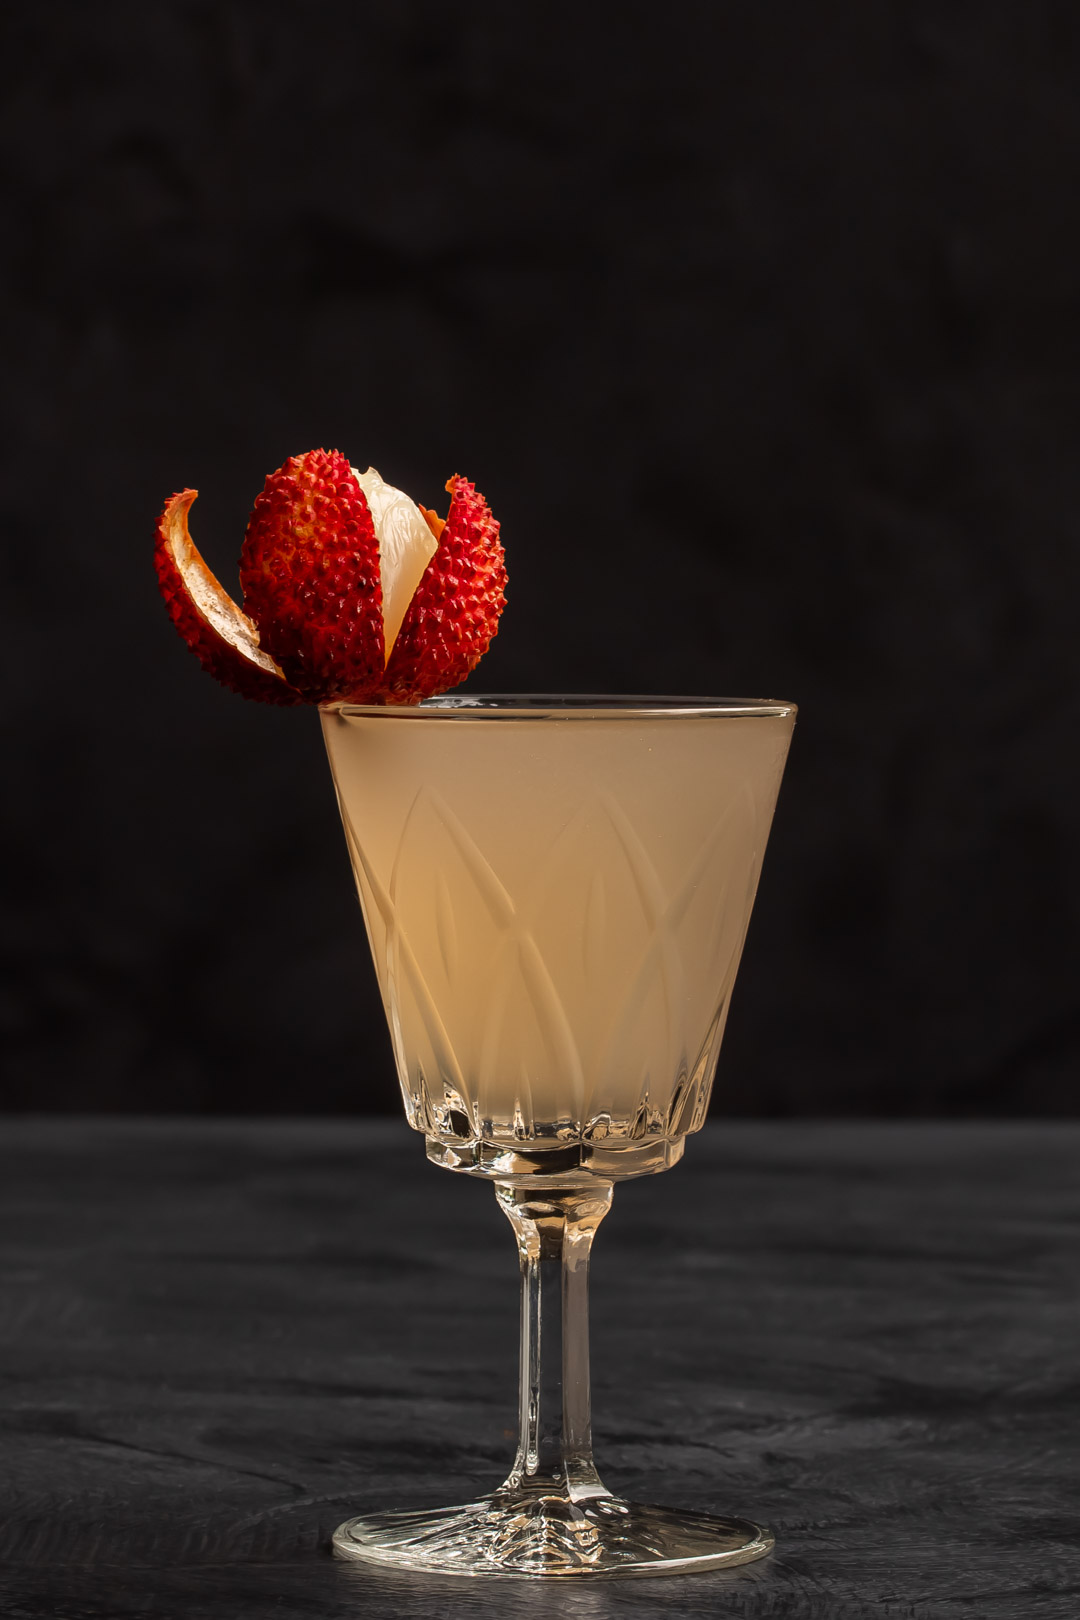 lychee reviver cocktail with lychee garnish